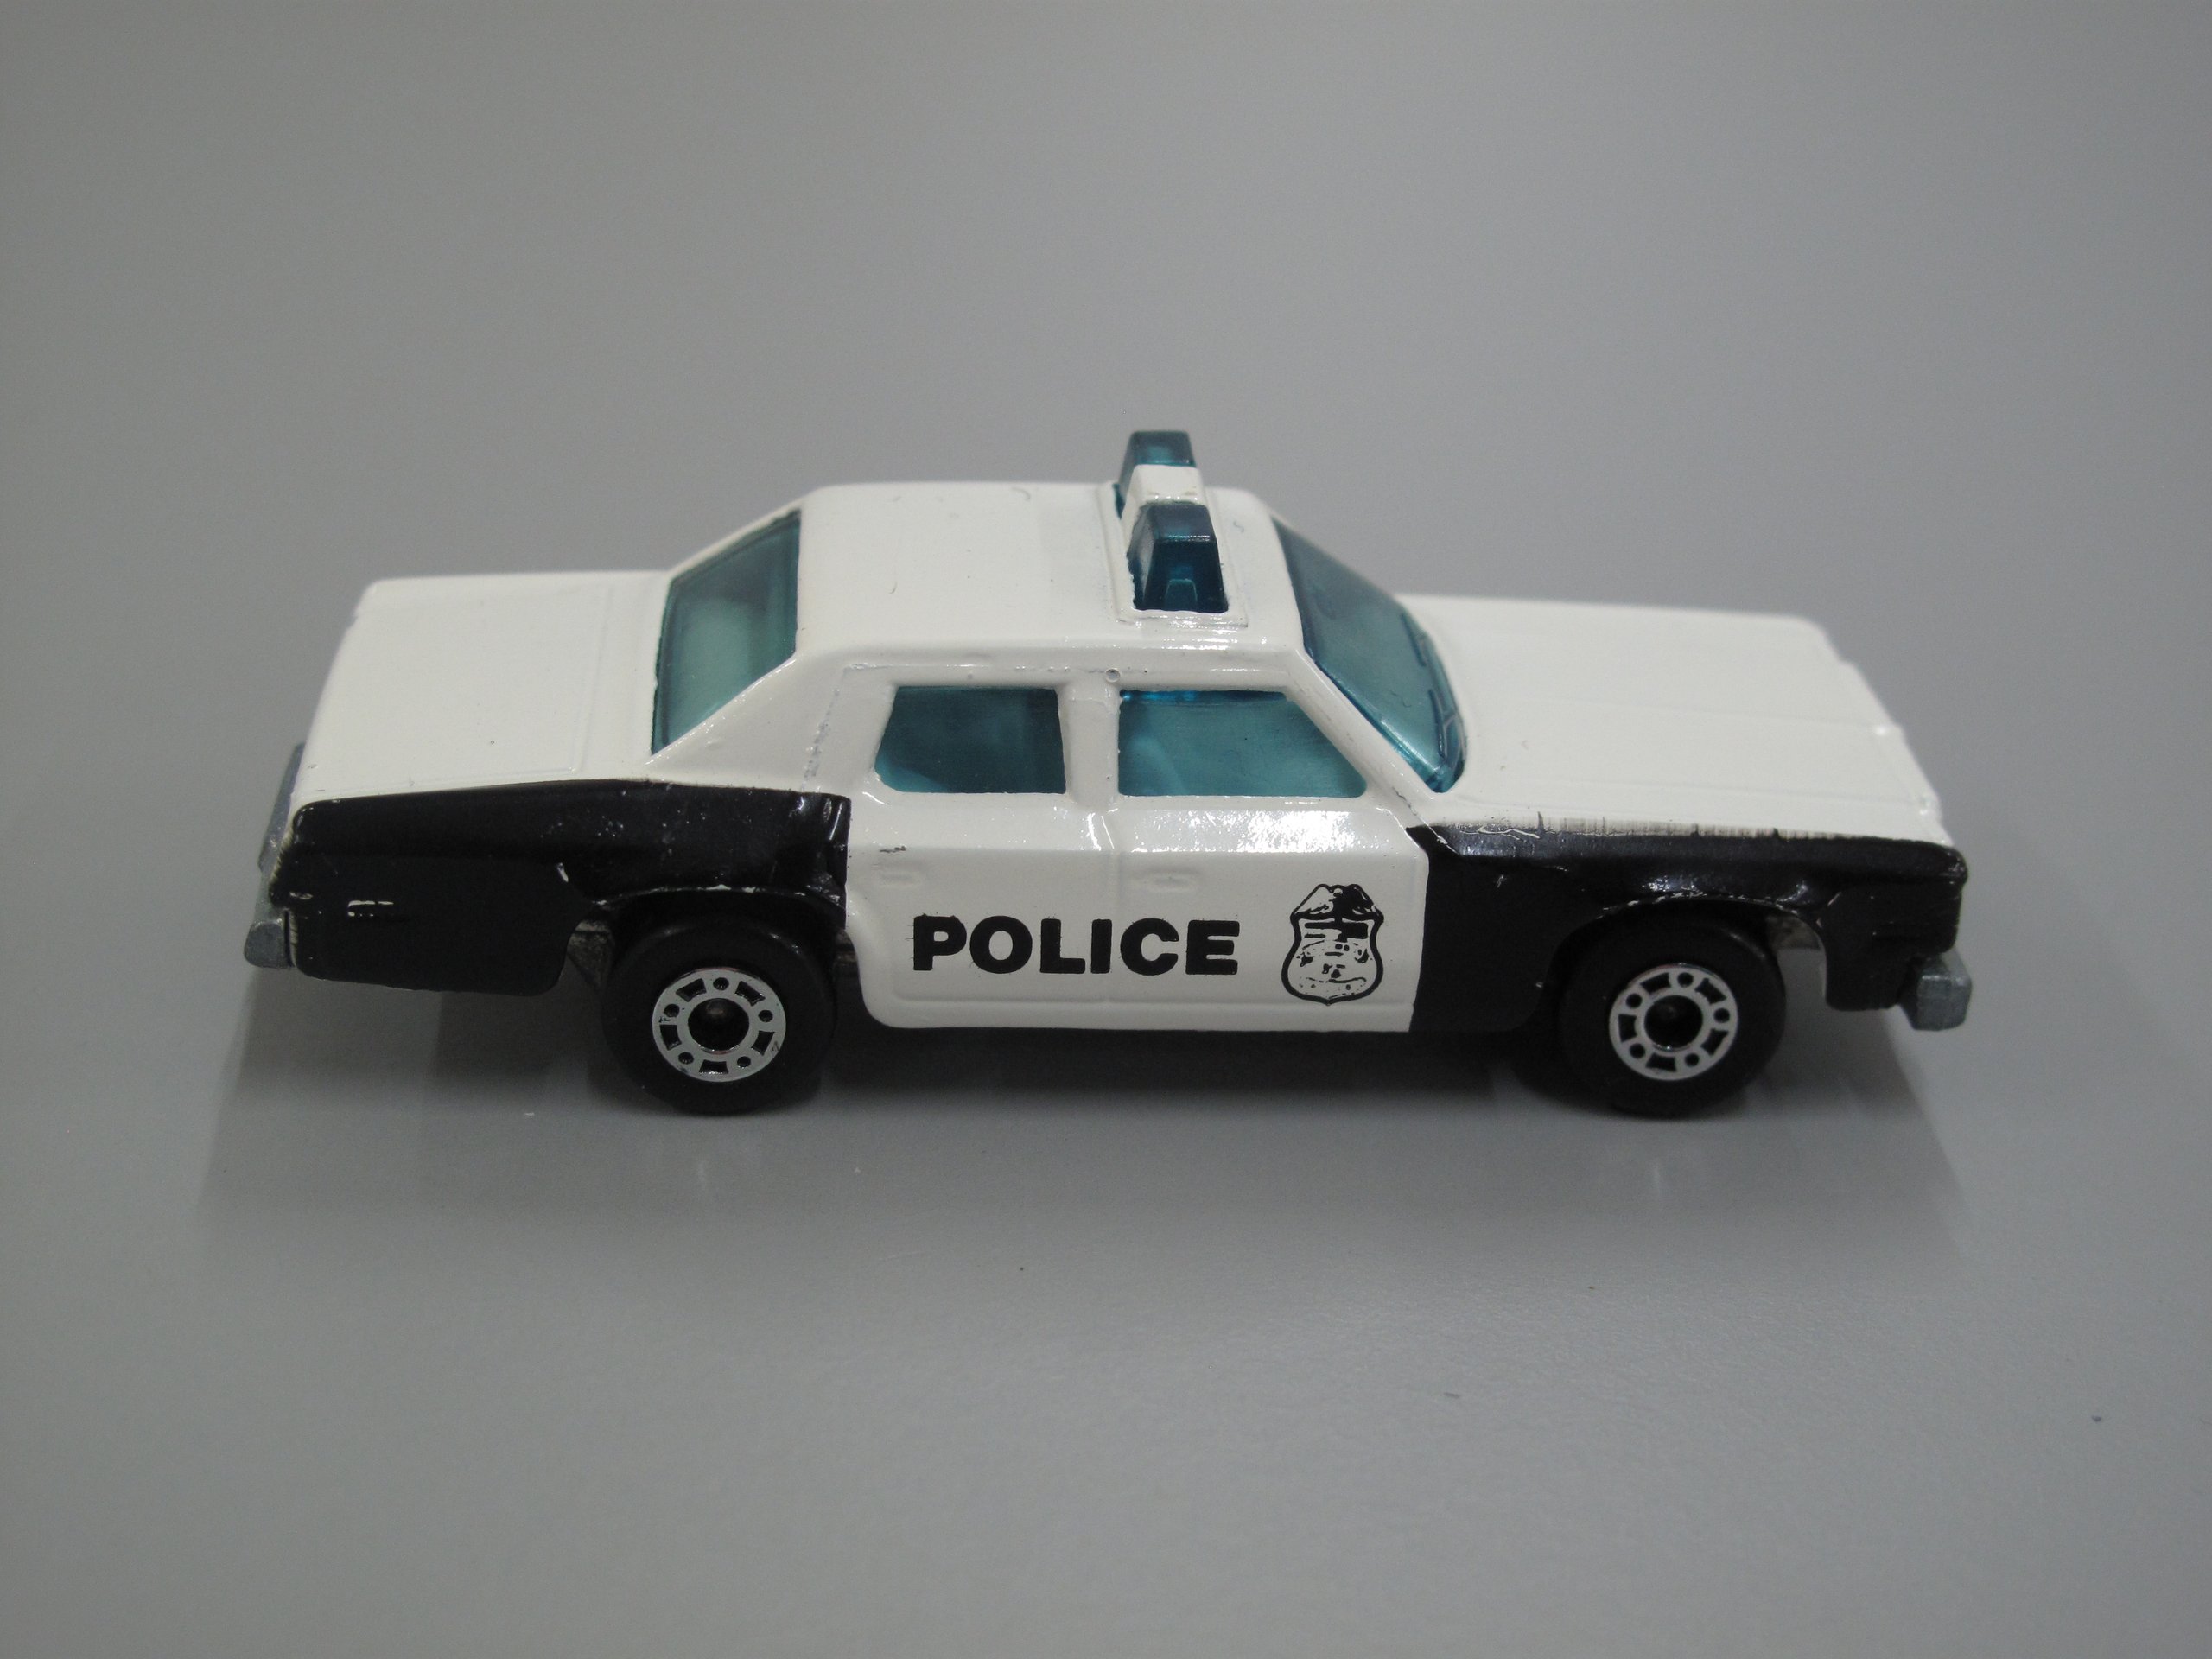 Toy matchbox Plymouth Gran Fury police car made by Lesney